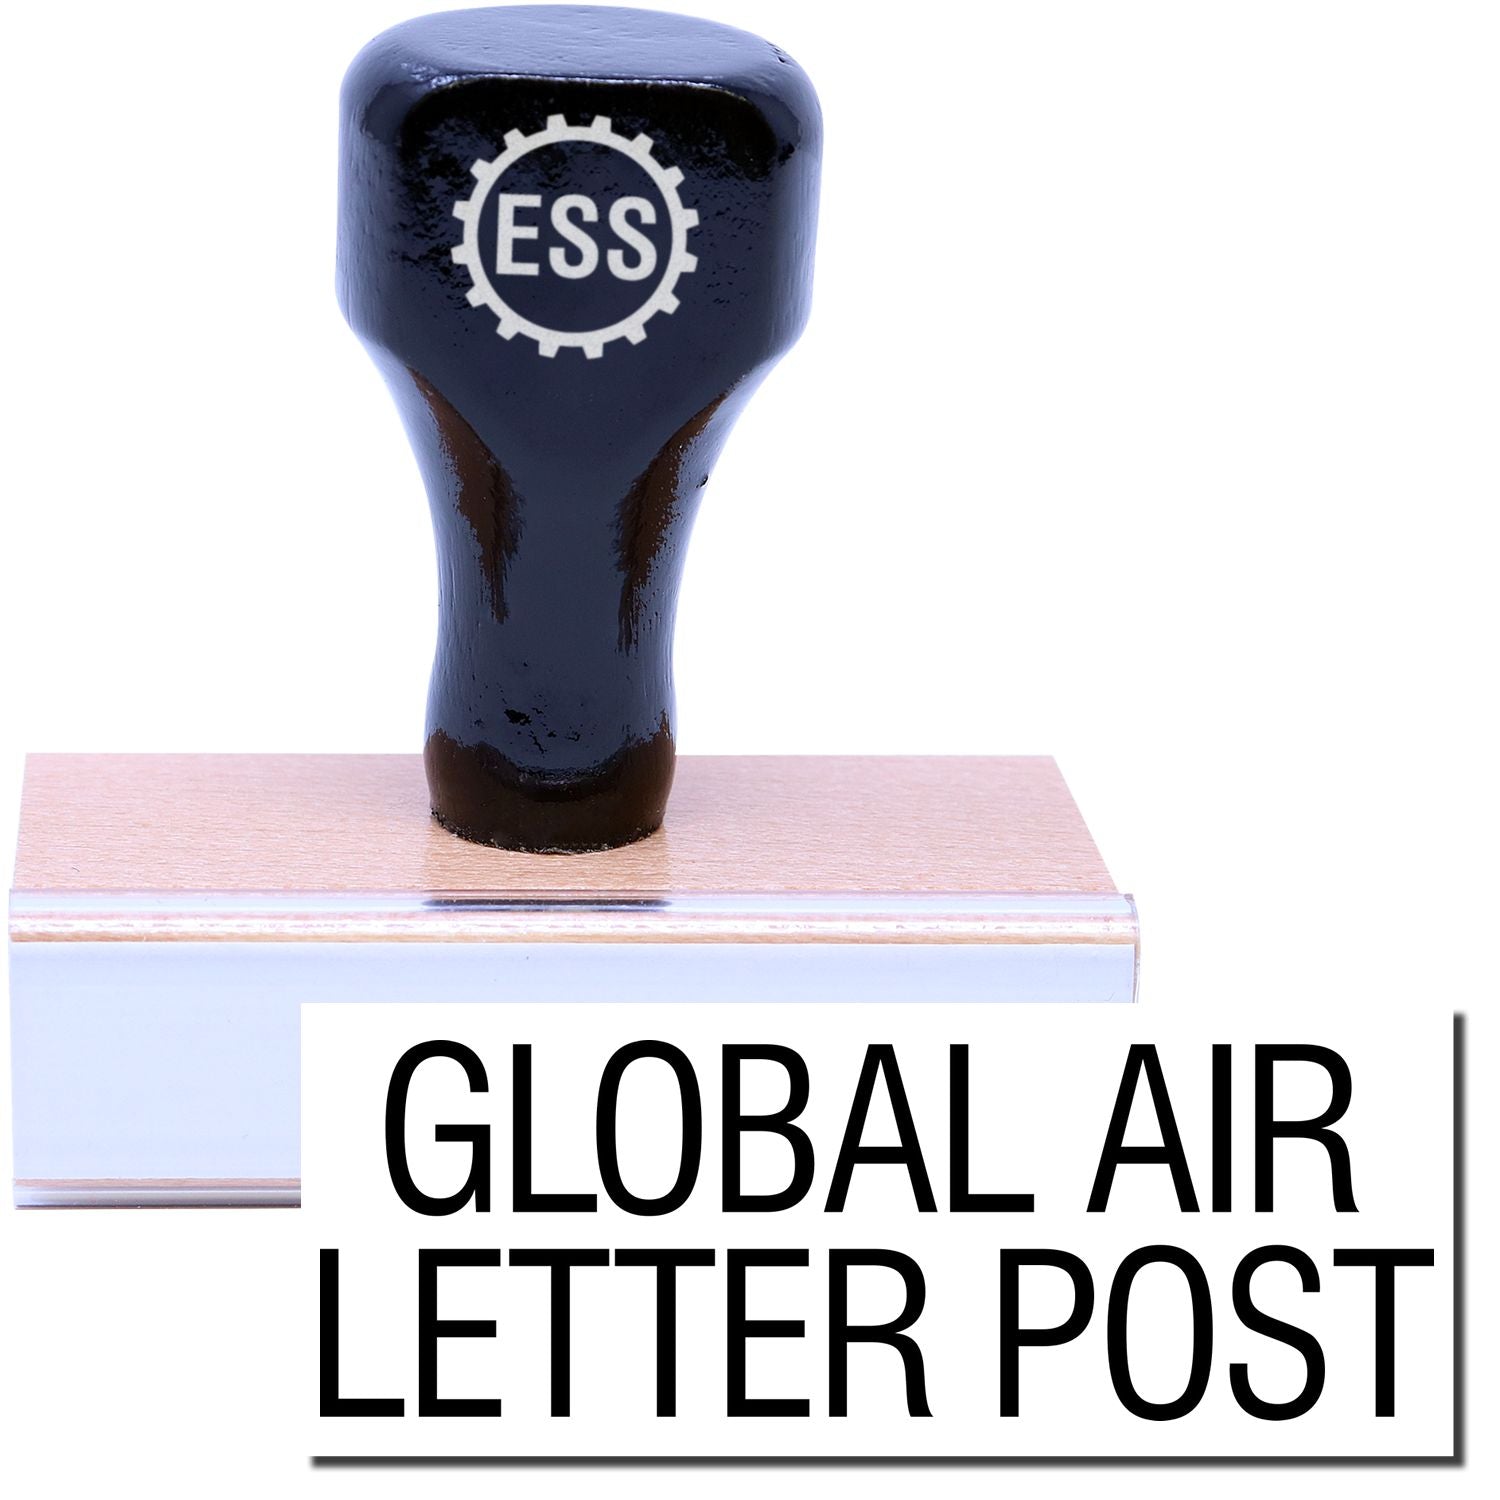 A stock office rubber stamp with a stamped image showing how the text "GLOBAL AIR LETTER POST" is displayed after stamping.